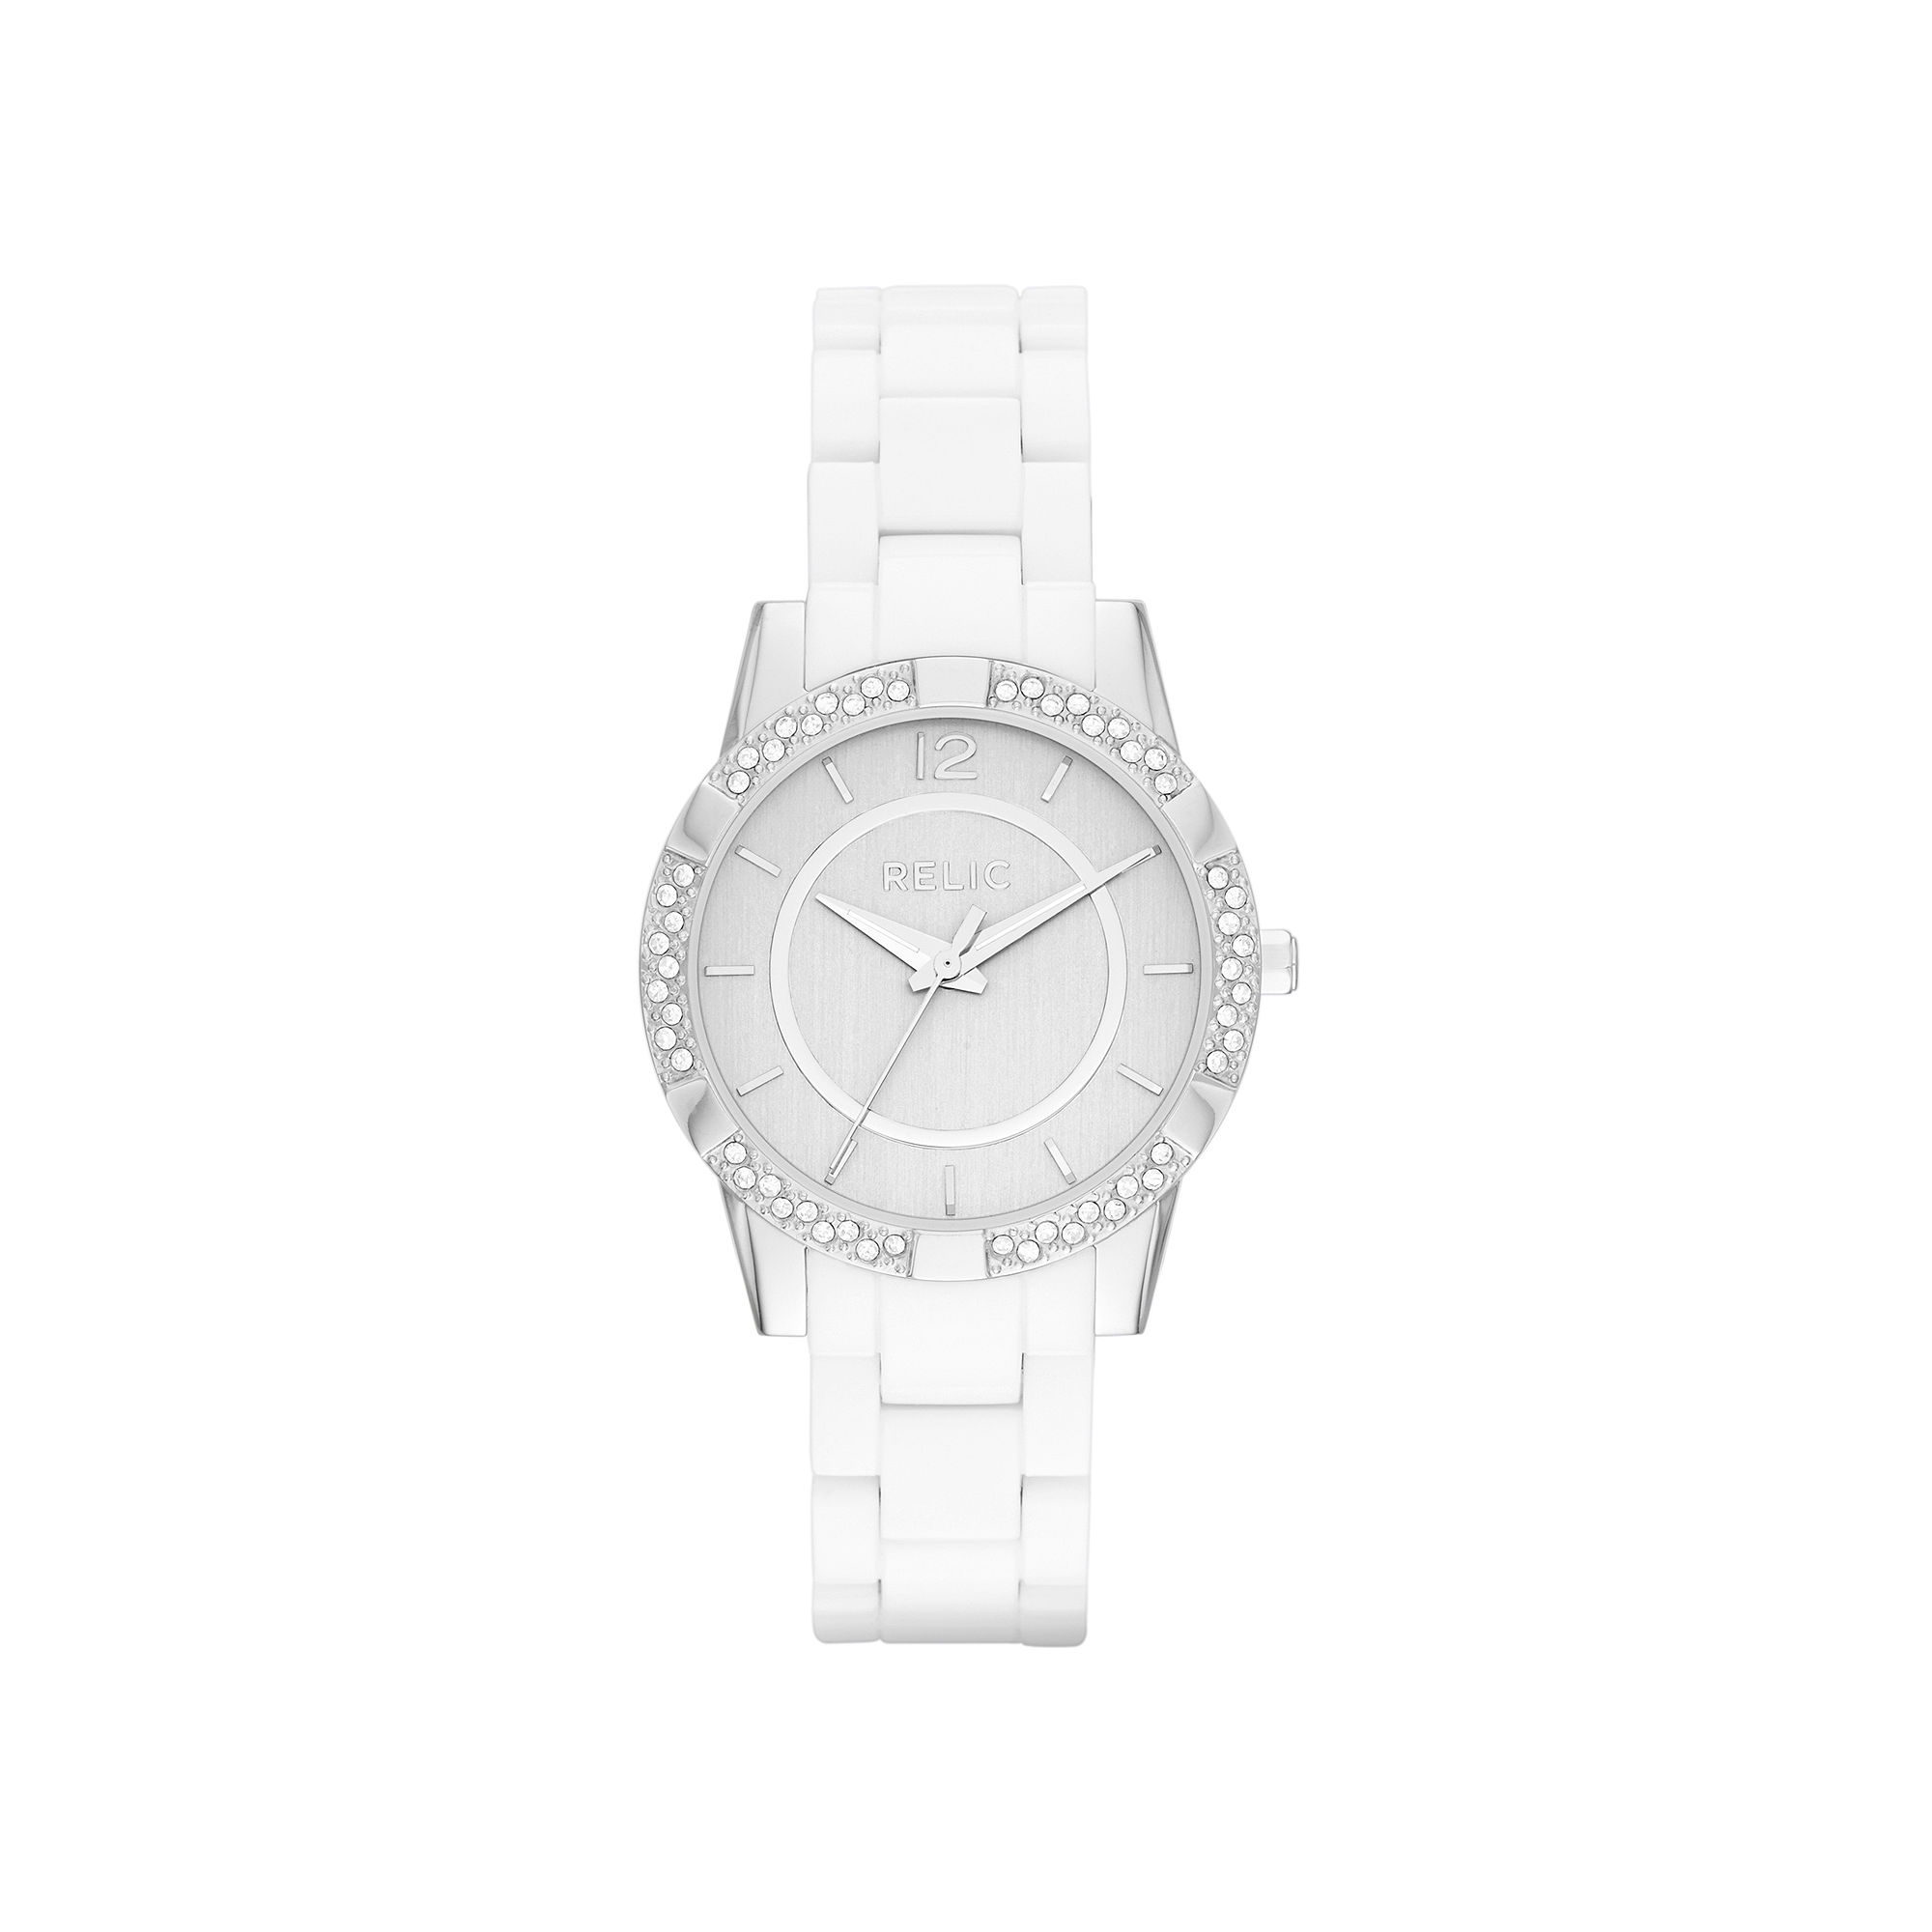 UPC 723765309736 product image for Relic Womens White Resin Band Glitz Watch | upcitemdb.com